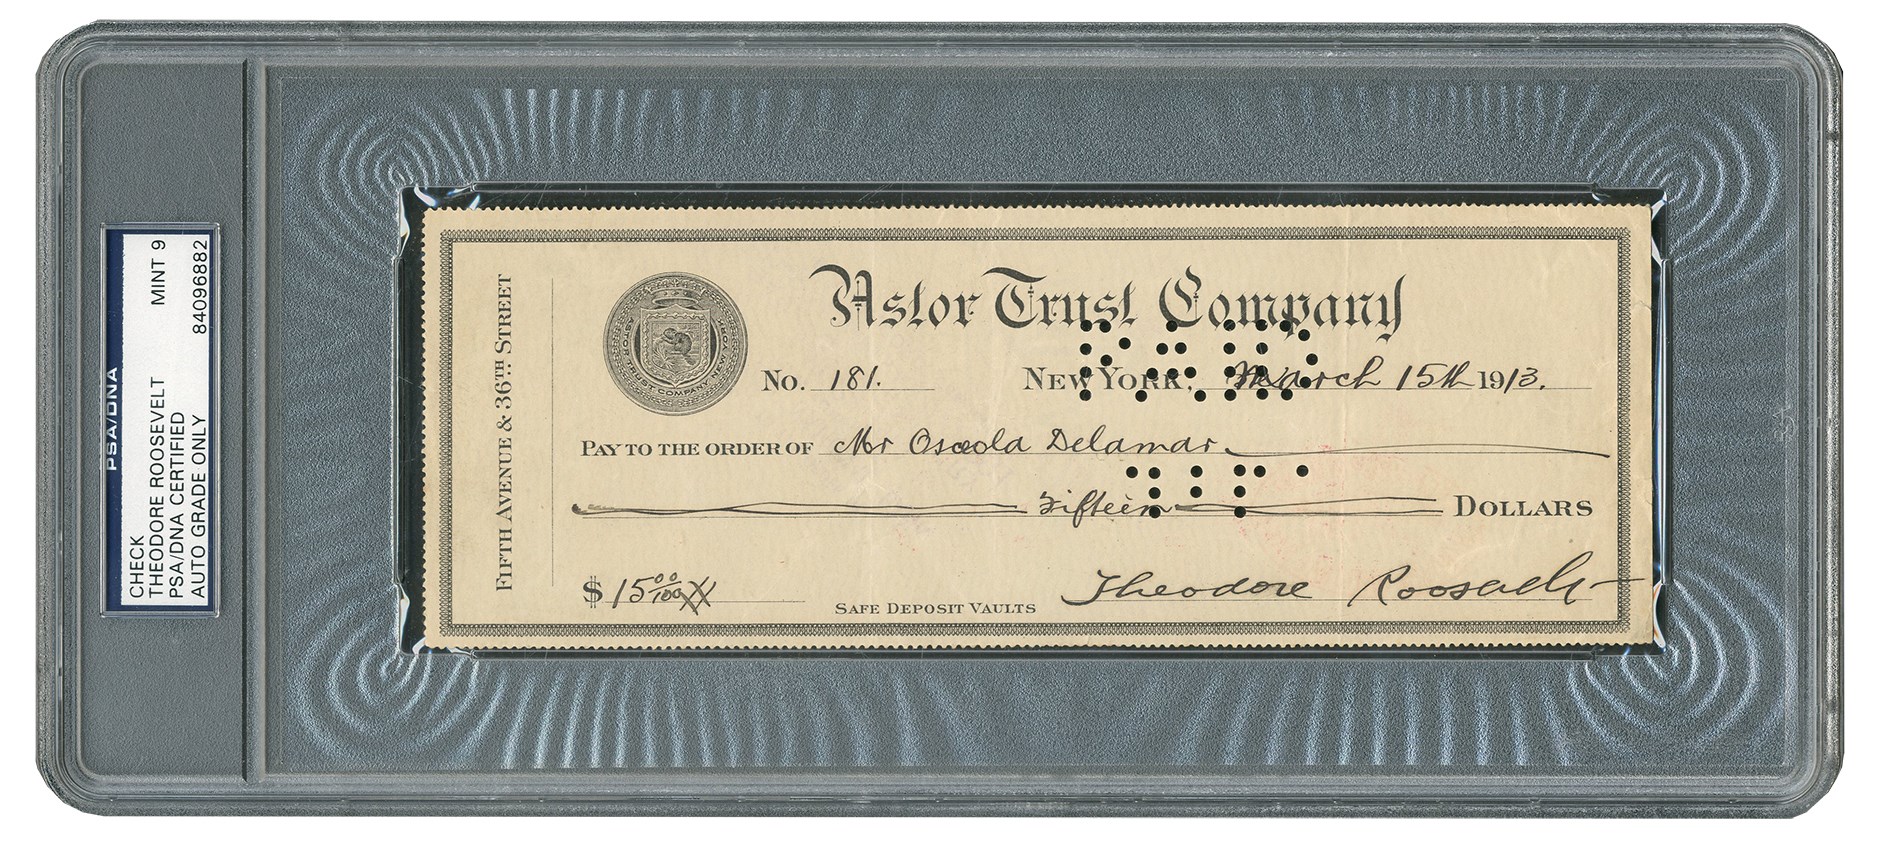 Rock And Pop Culture - 1913 Theodore Roosevelt Signed Bank Check (PSA MINT 9)